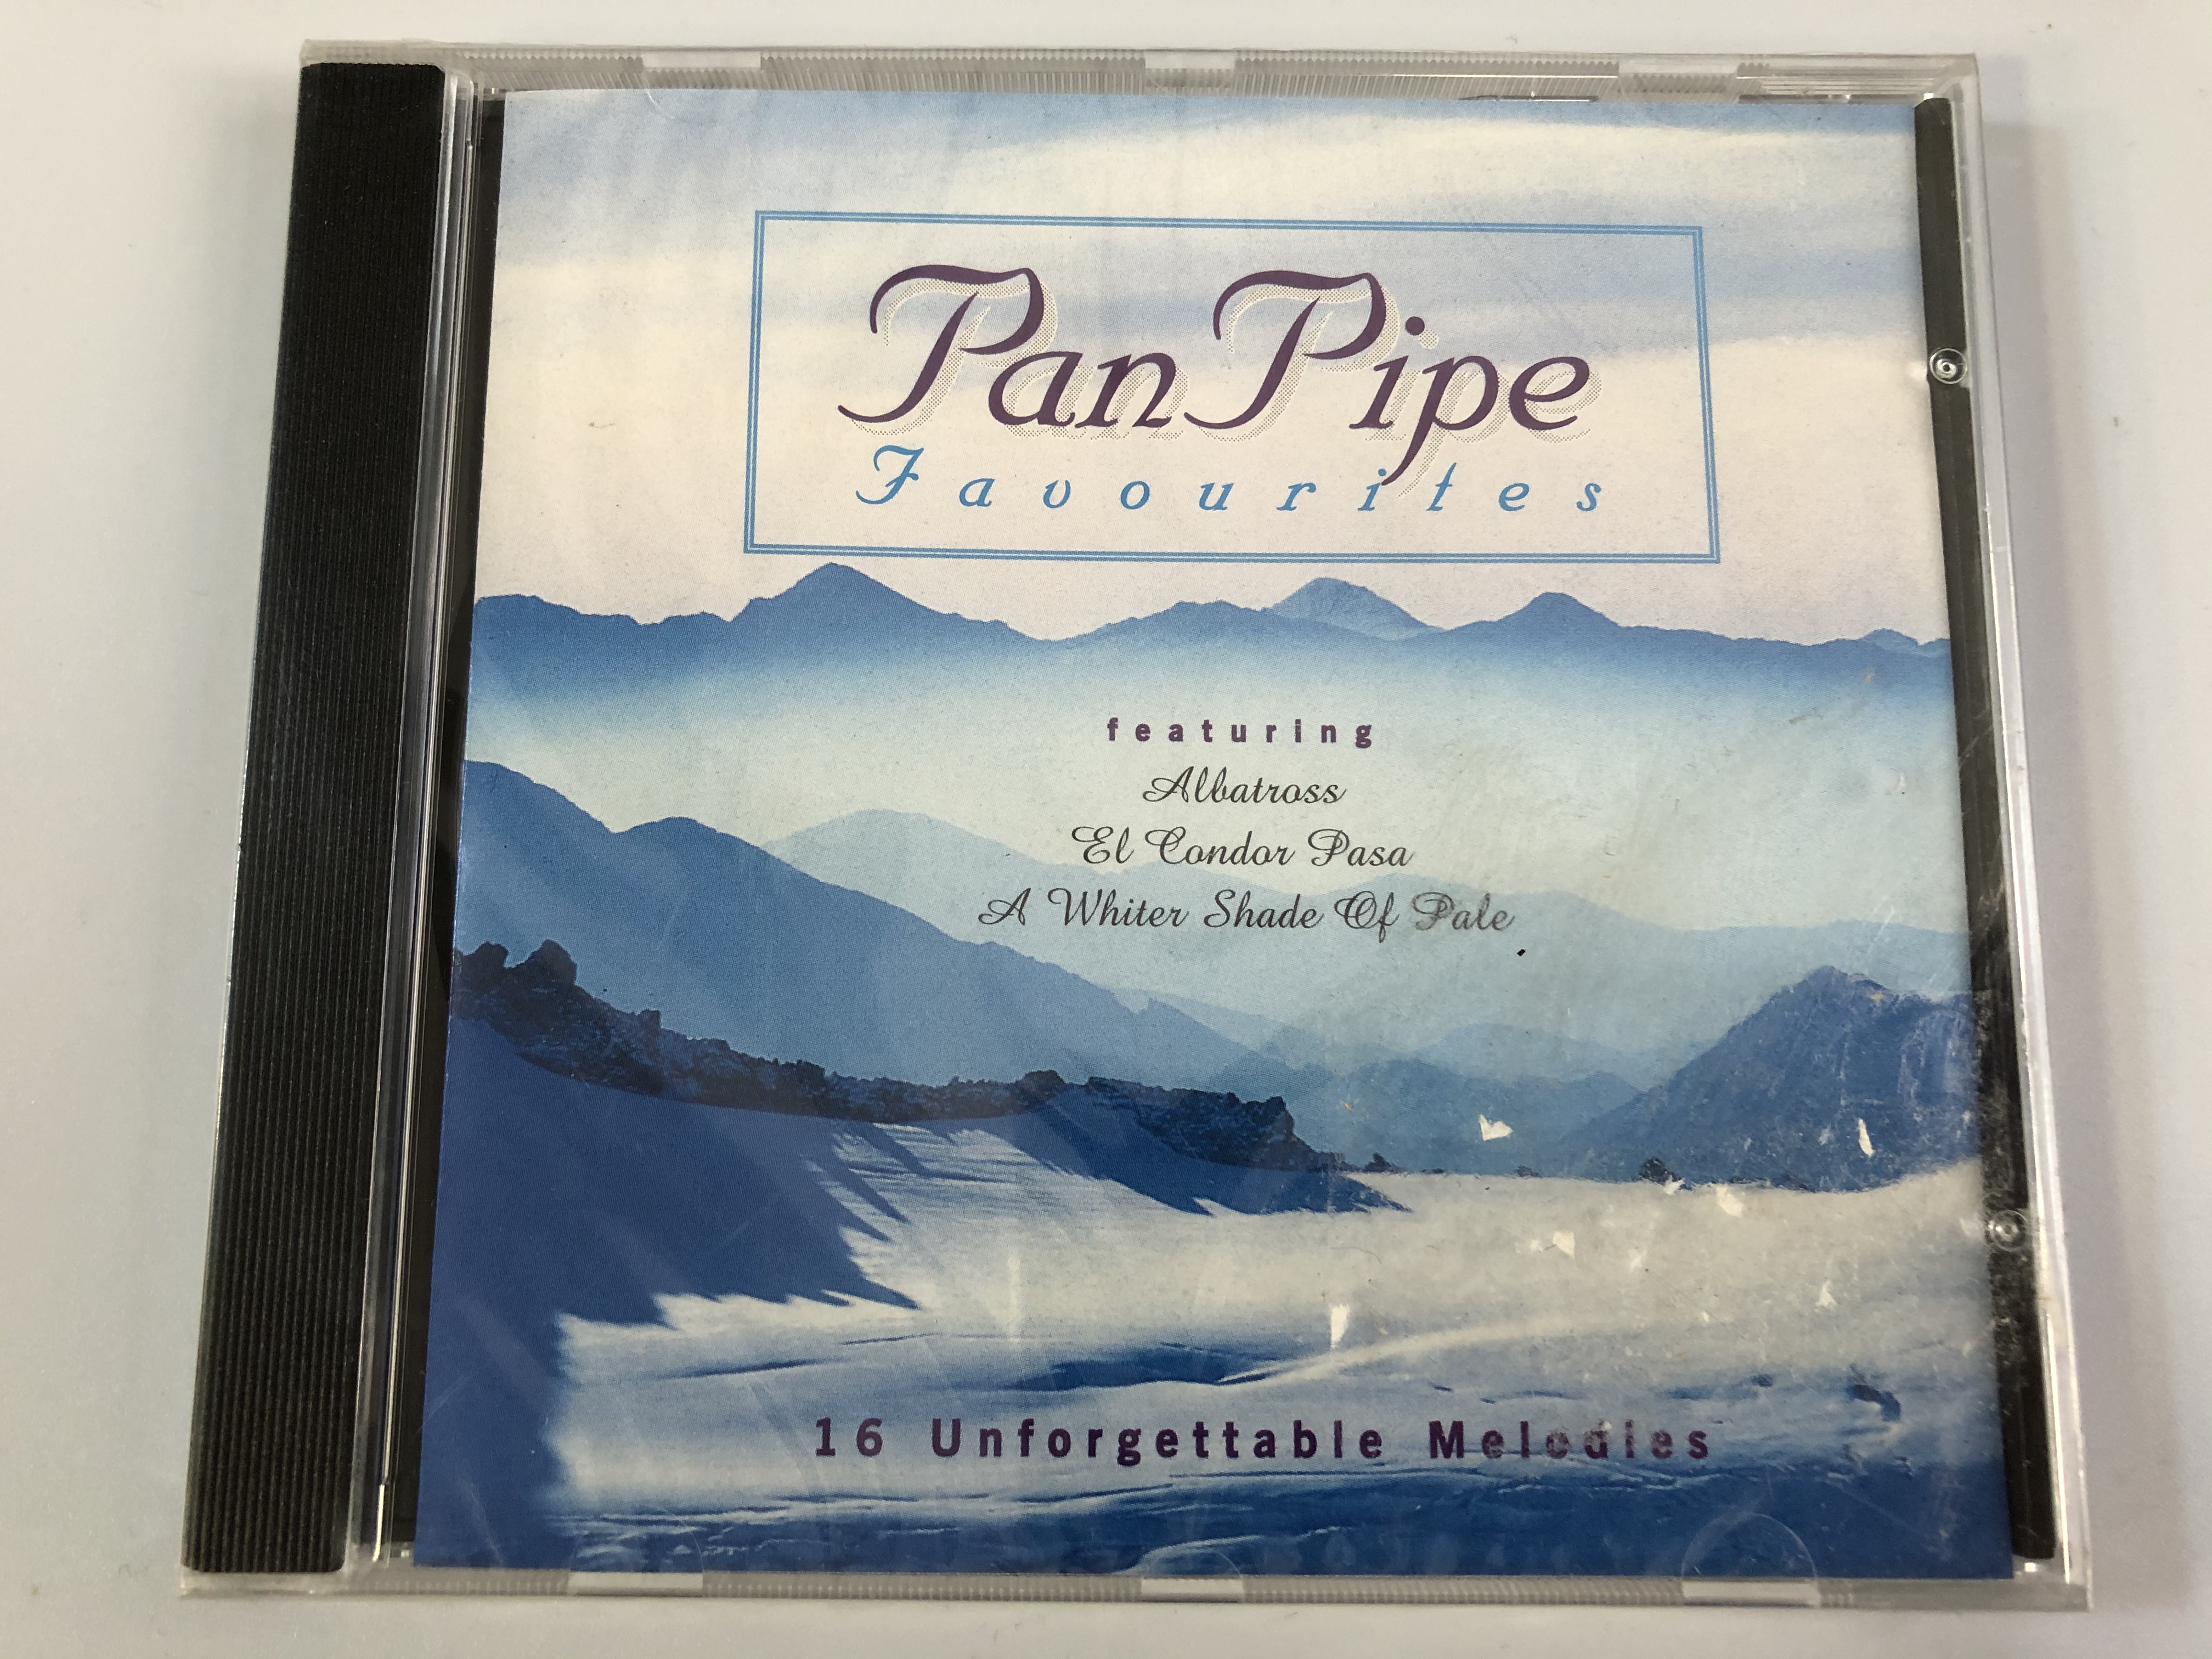 pan-pipe-favourites-featuring-albatross-el-condor-pasa-a-whiter-shade-of-pale-16-unforgettable-melodies-time-music-international-limited-audio-cd-tmi014-1-.jpg